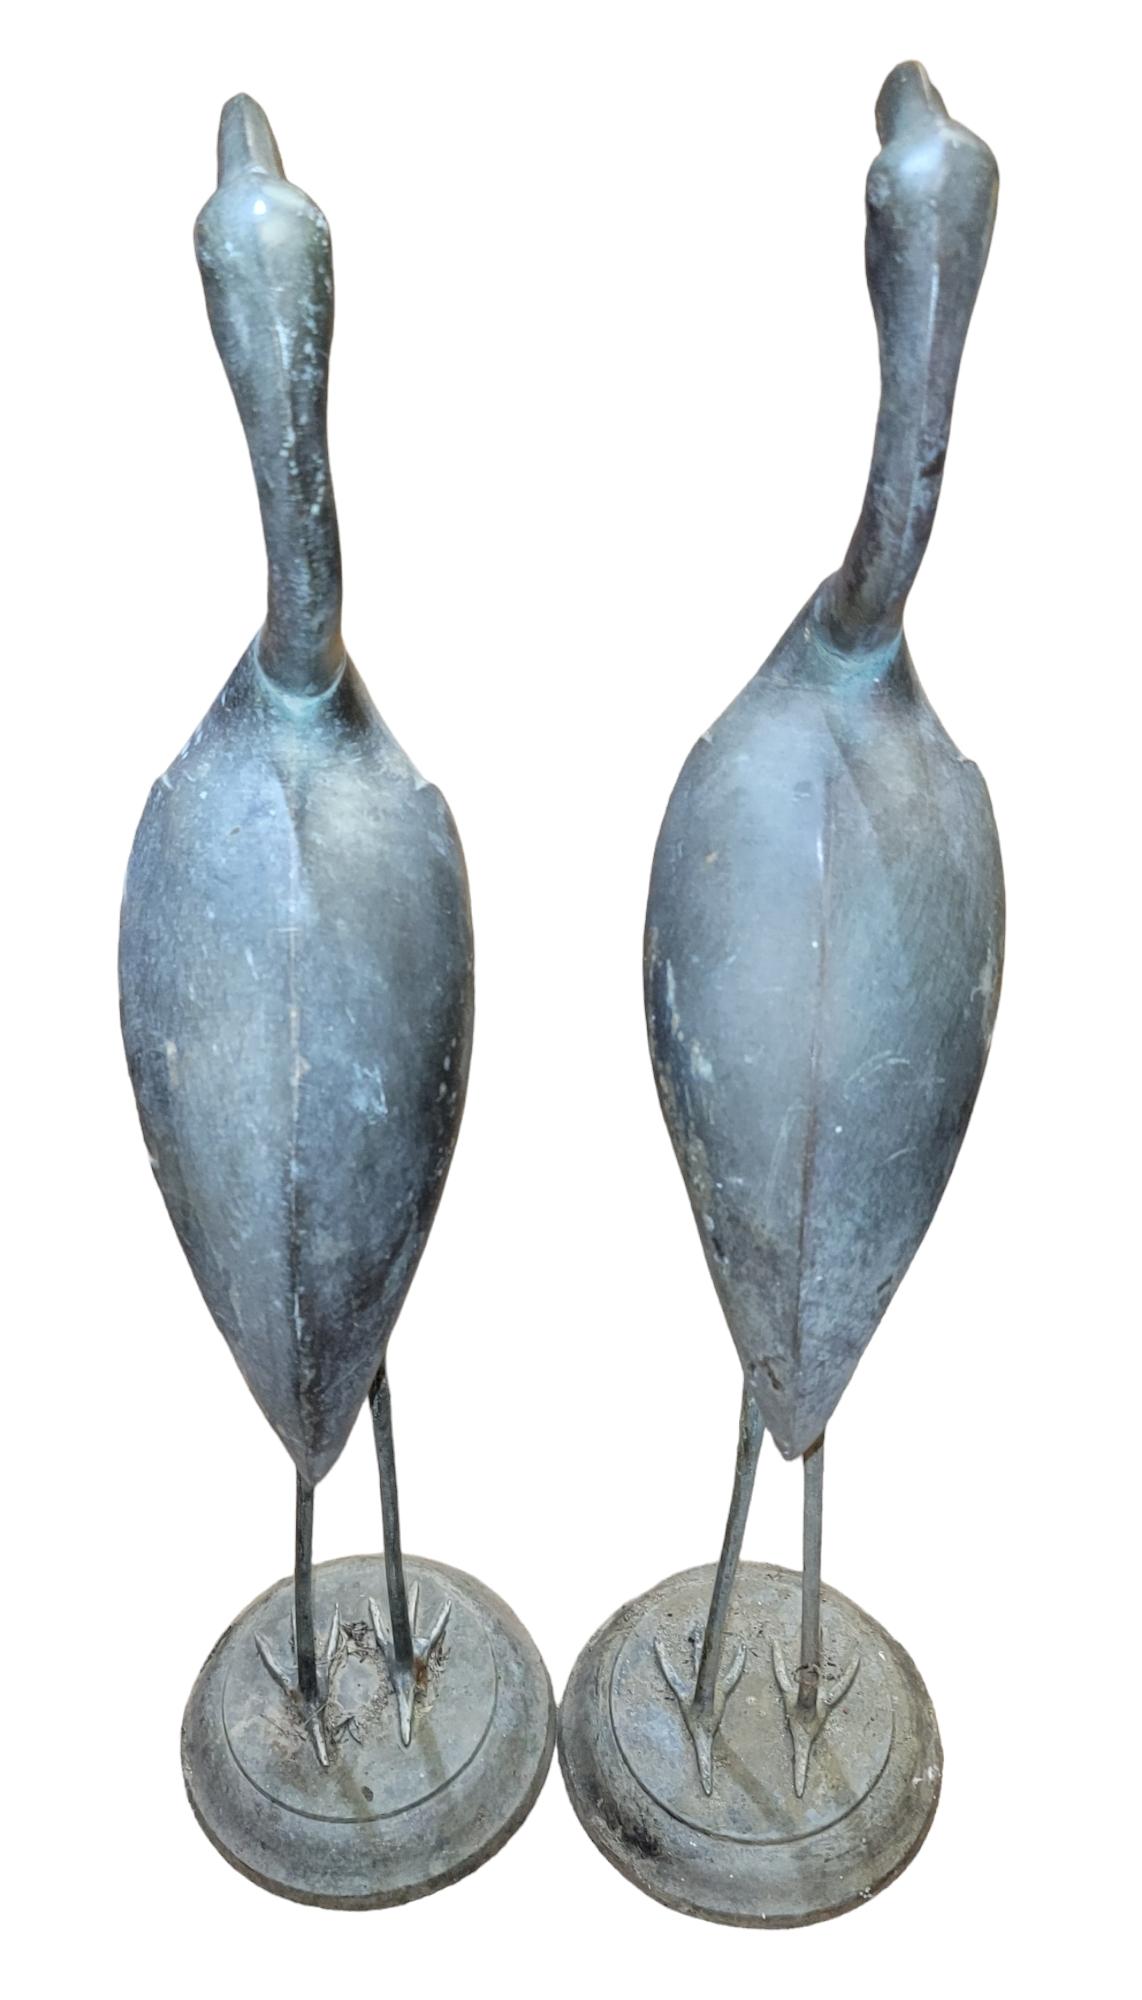 Large Bronze Crane Piped Garden Statues Pair In Good Condition For Sale In Pasadena, CA